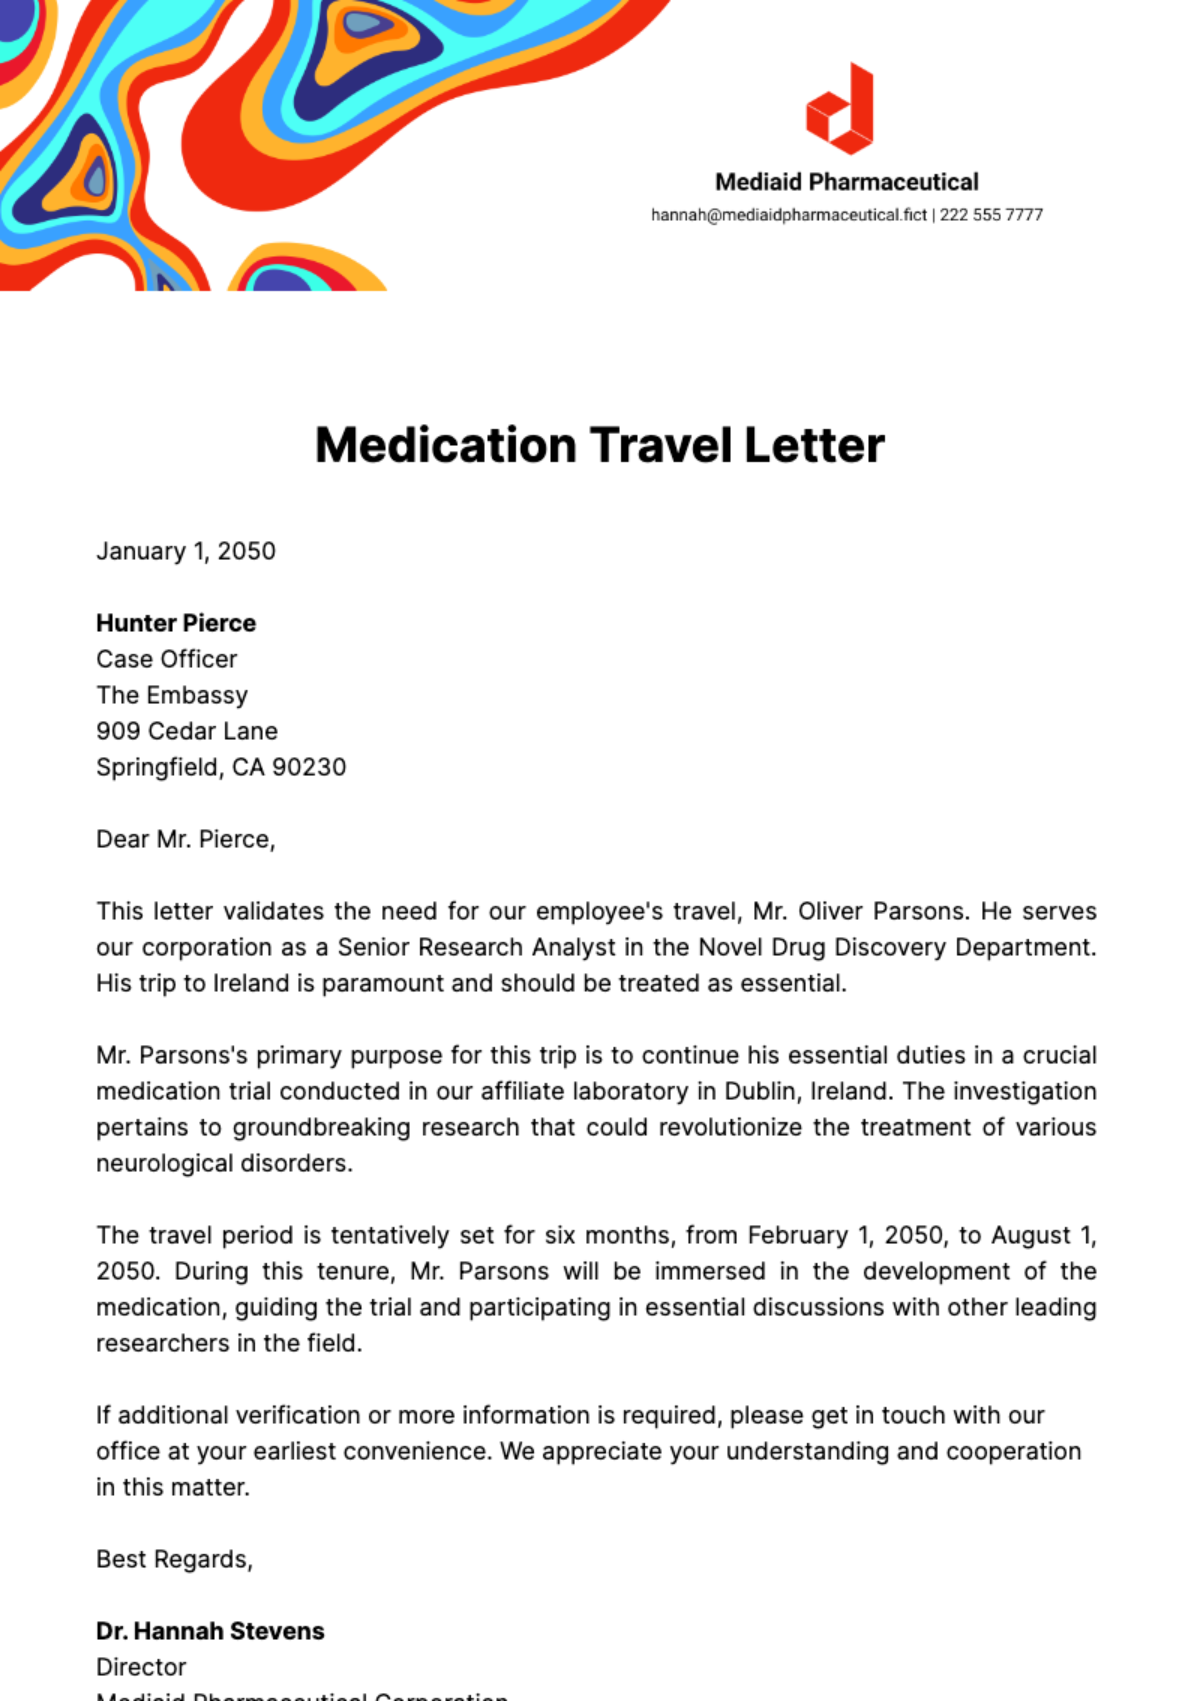 Free Medication Travel Letter Template